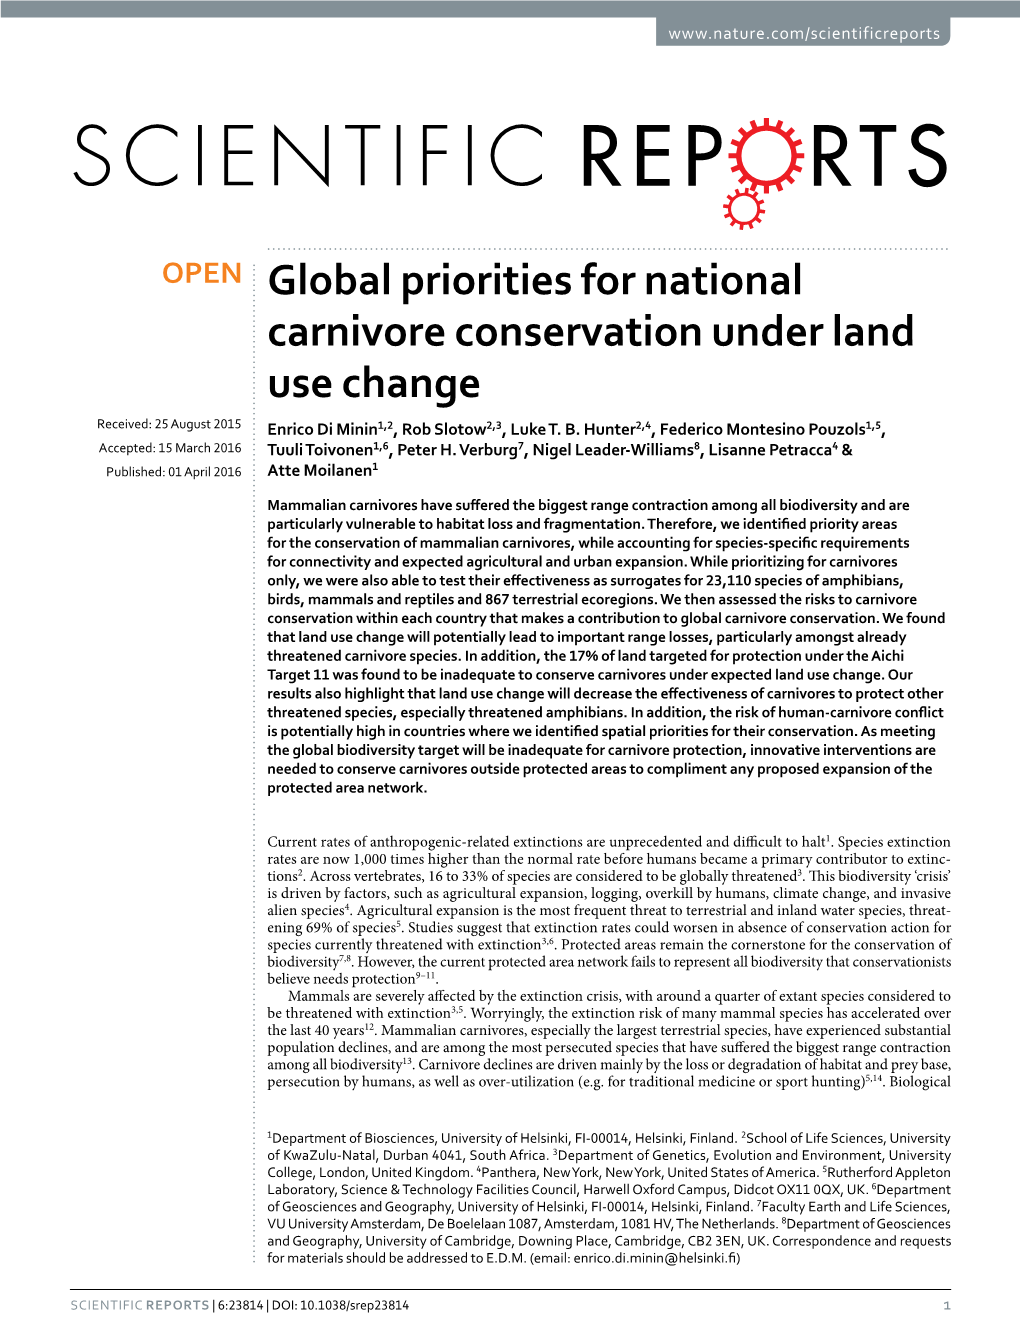 Global Priorities for National Carnivore Conservation Under Land Use Change Received: 25 August 2015 Enrico Di Minin1,2, Rob Slotow2,3, Luke T